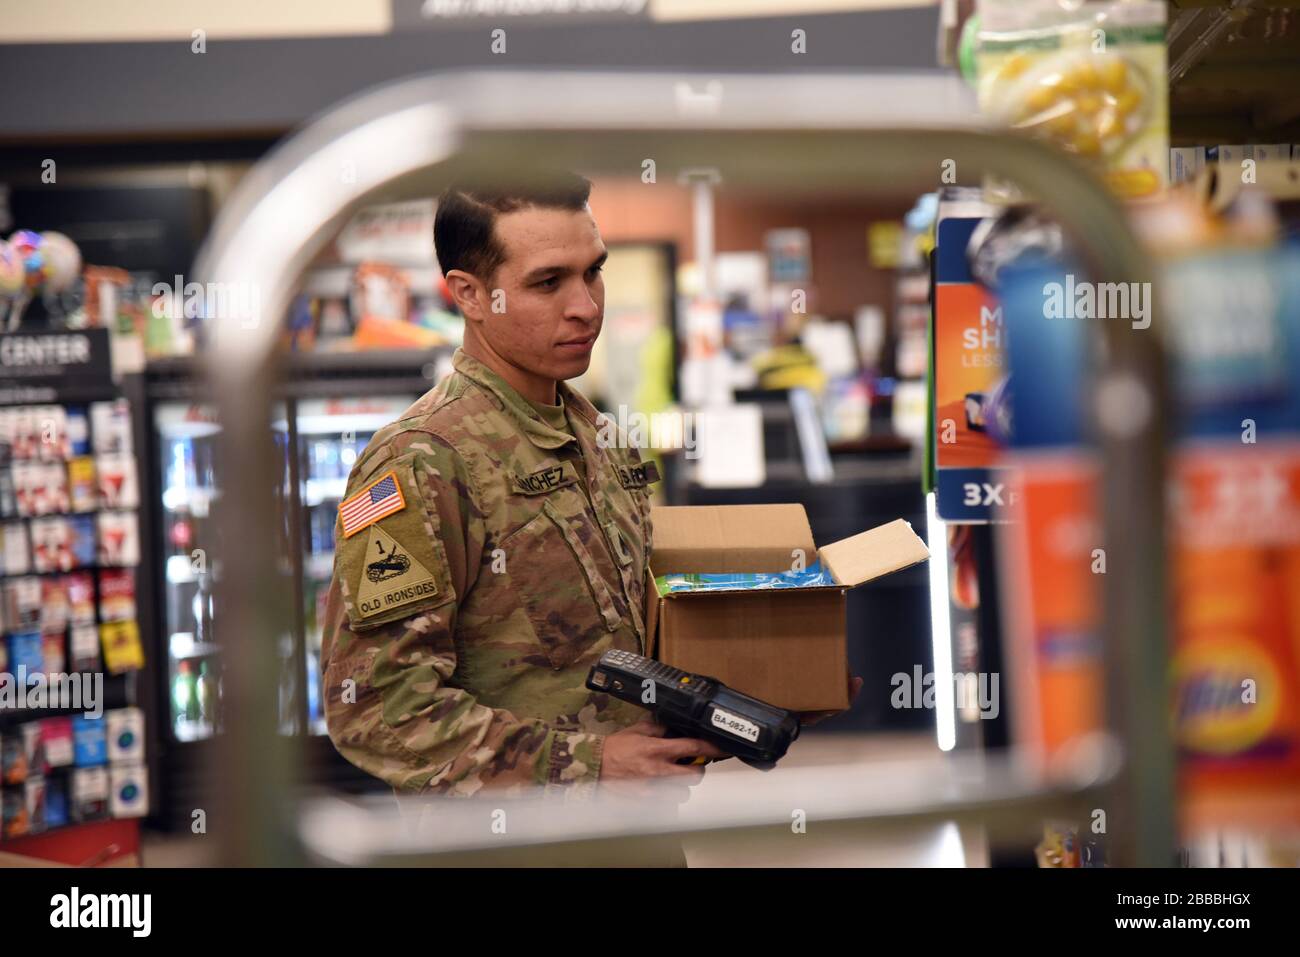 Sgt. Alejandro Sanchez, 158 Charlie Company infantryman, stocks shelves at a local grocery store in support of Pima County, Ariz., March 28, 2020. The Arizona National Guard activated more than 700 Arizona Citizen-Soldiers and Airmen to support grocery stores, food banks and other community needs during this state of emergency response (U.S. Air National Guard photo by Tech. Sgt. Michael Matkin). Stock Photo